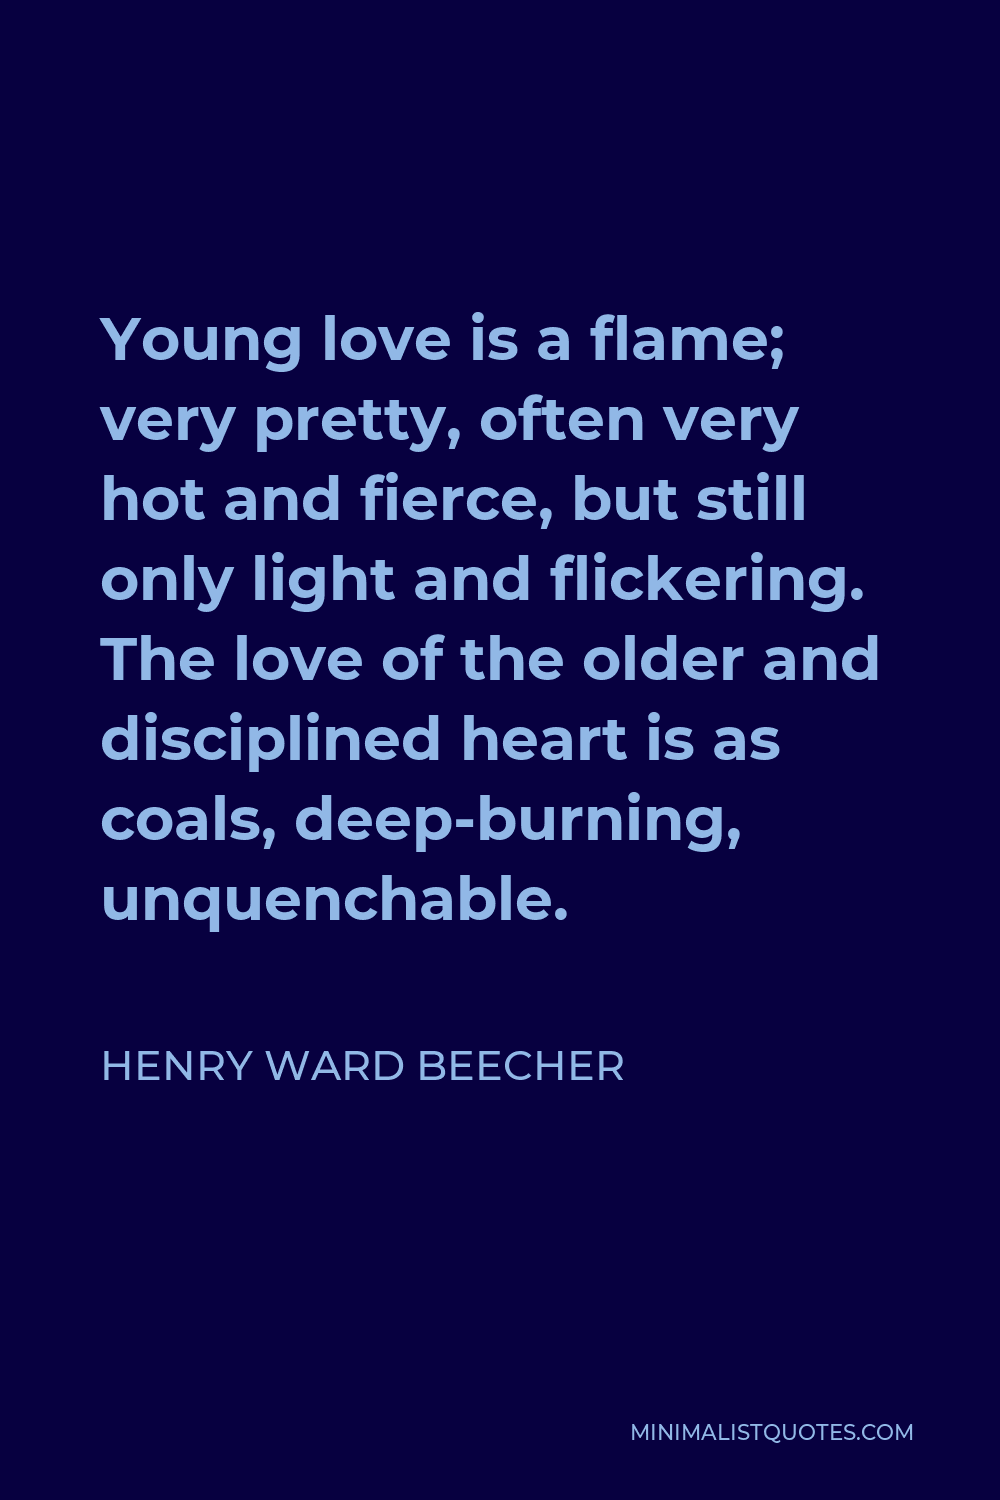 Henry Ward Beecher Quote - Young love is a flame; very pretty, often very hot and fierce, but still only light and flickering. The love of the older and disciplined heart is as coals, deep-burning, unquenchable.